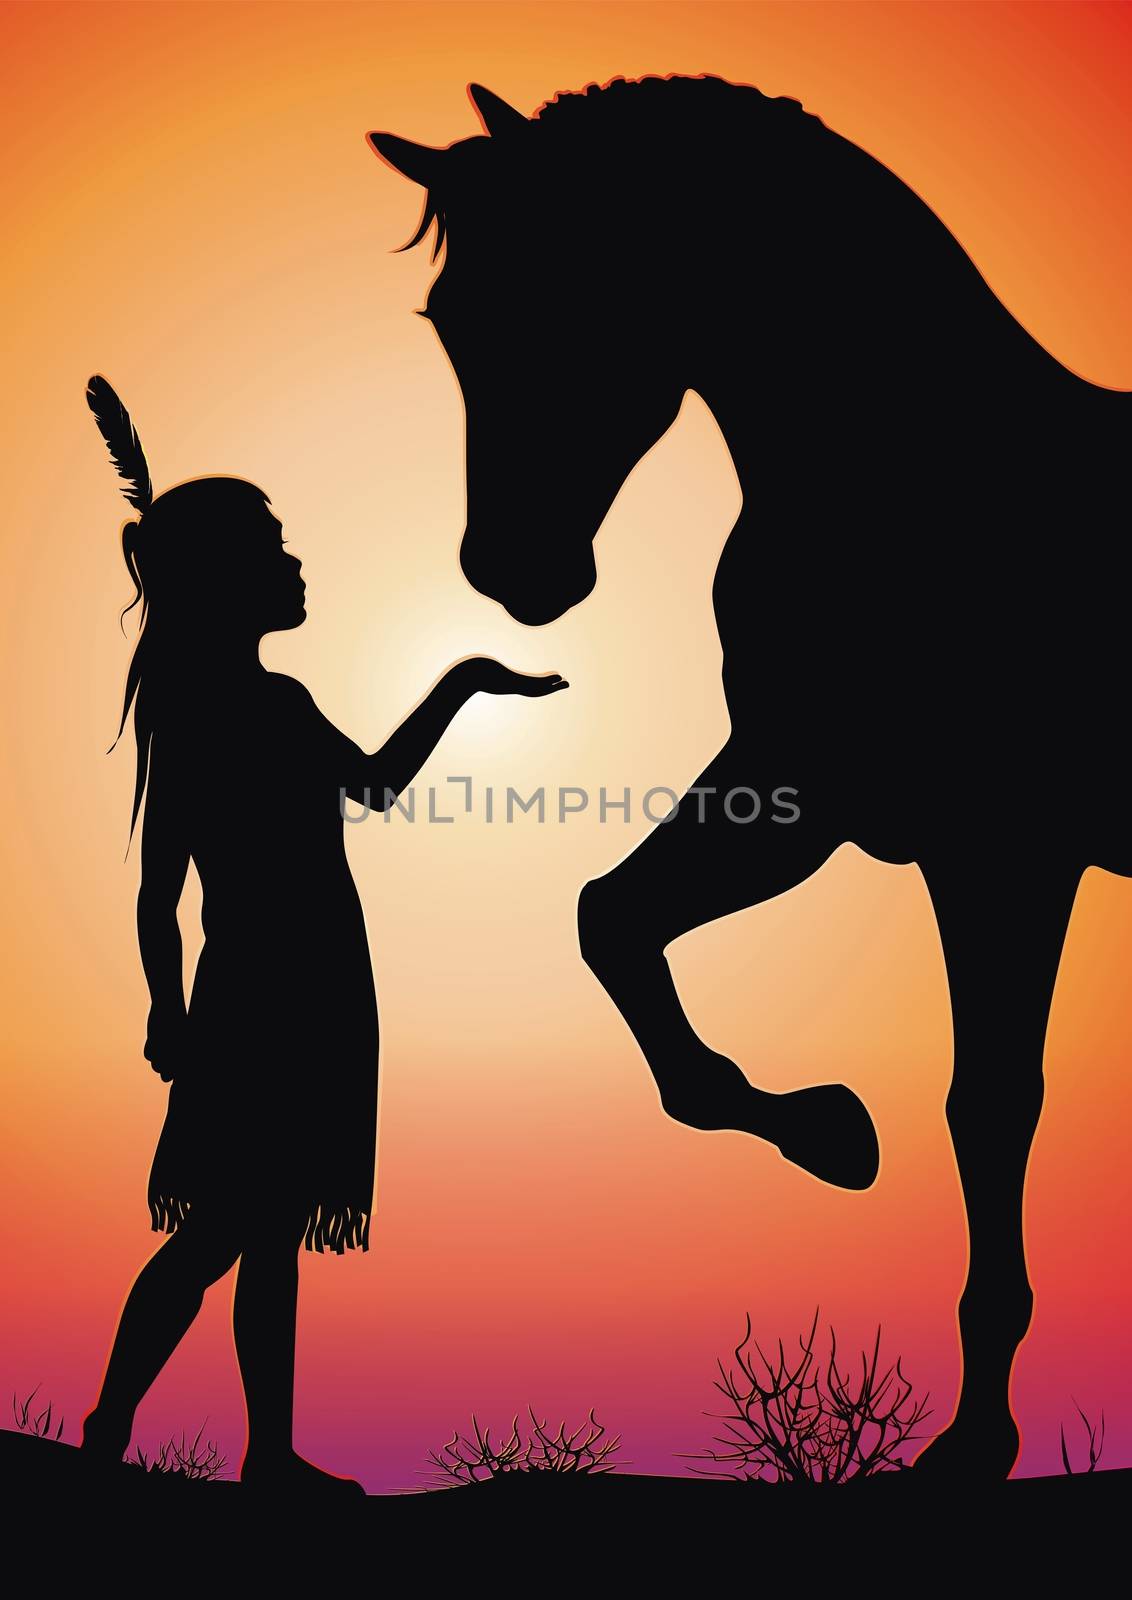 Magical Friendship with Animal. Little Native American Girl and the Wild Horse Illustration.